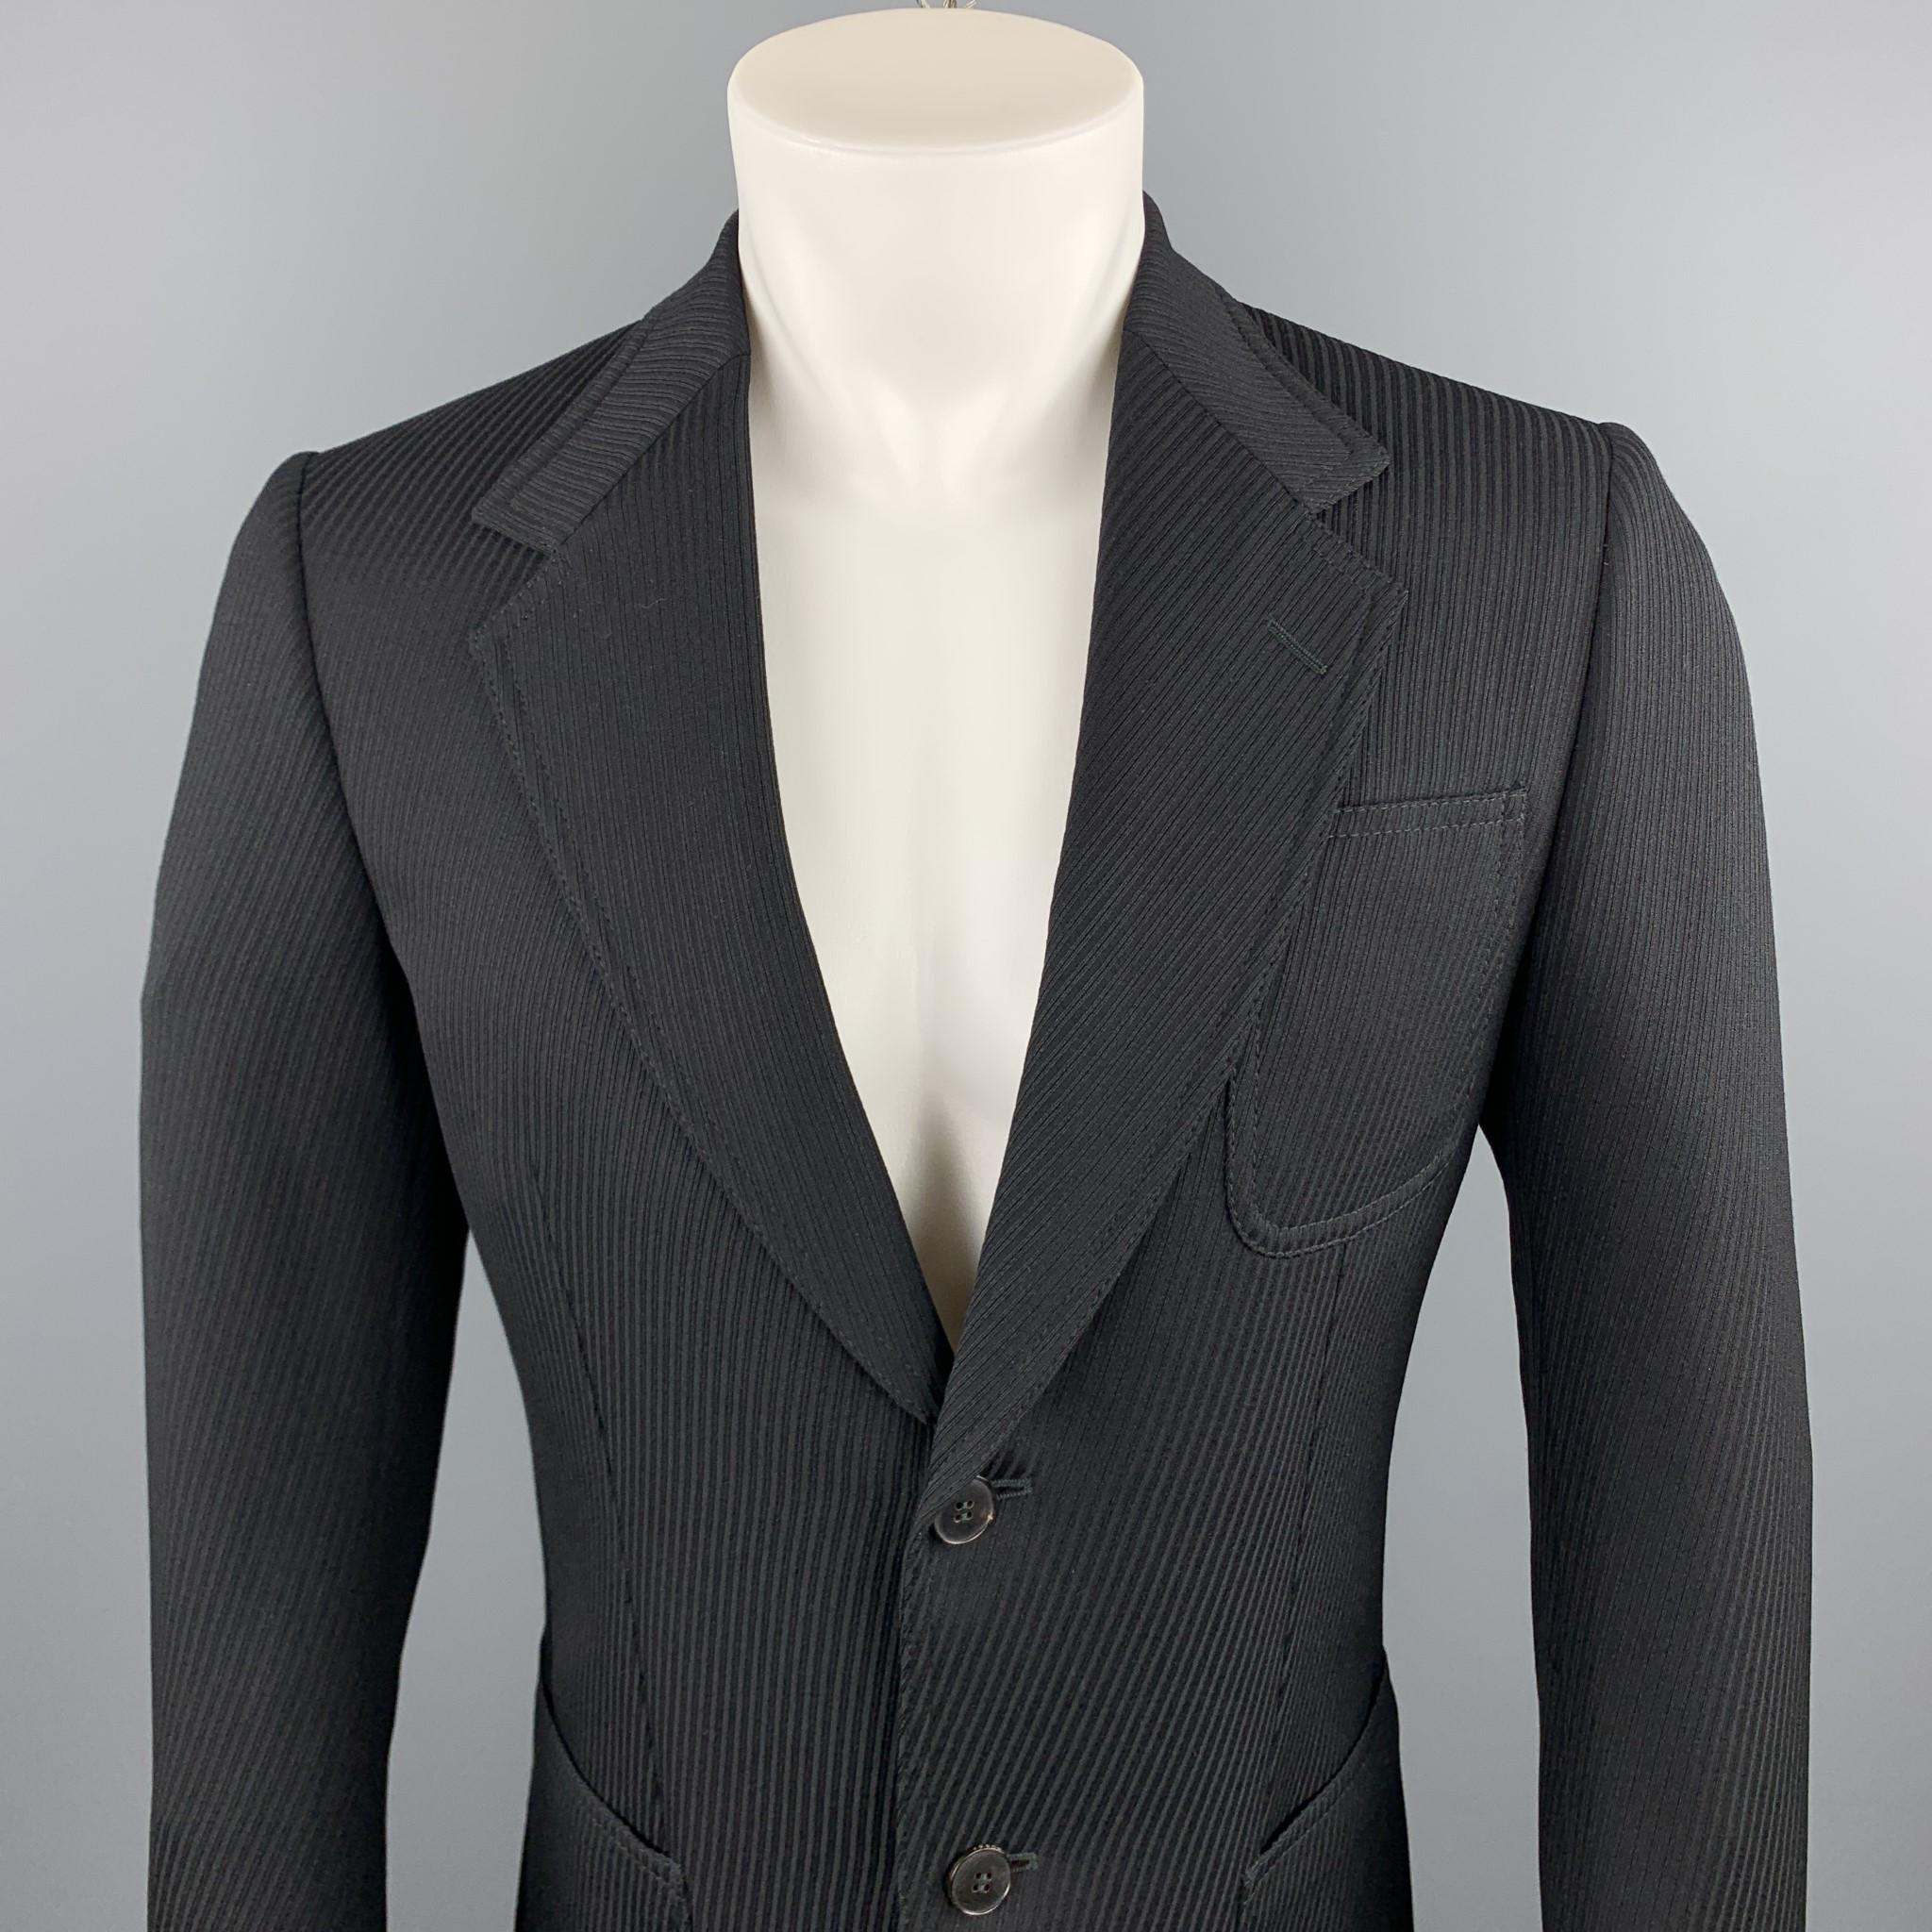 GUCCI sport coat comes in a black textured wool featuring a notch lapel style, patch pockets, printed liner, and a two button closure. Made in Italy.

Excellent Pre-Owned Condition.
Marked: IT 48

Measurements:

Shoulder: 16 in. 
Chest: 38 in.